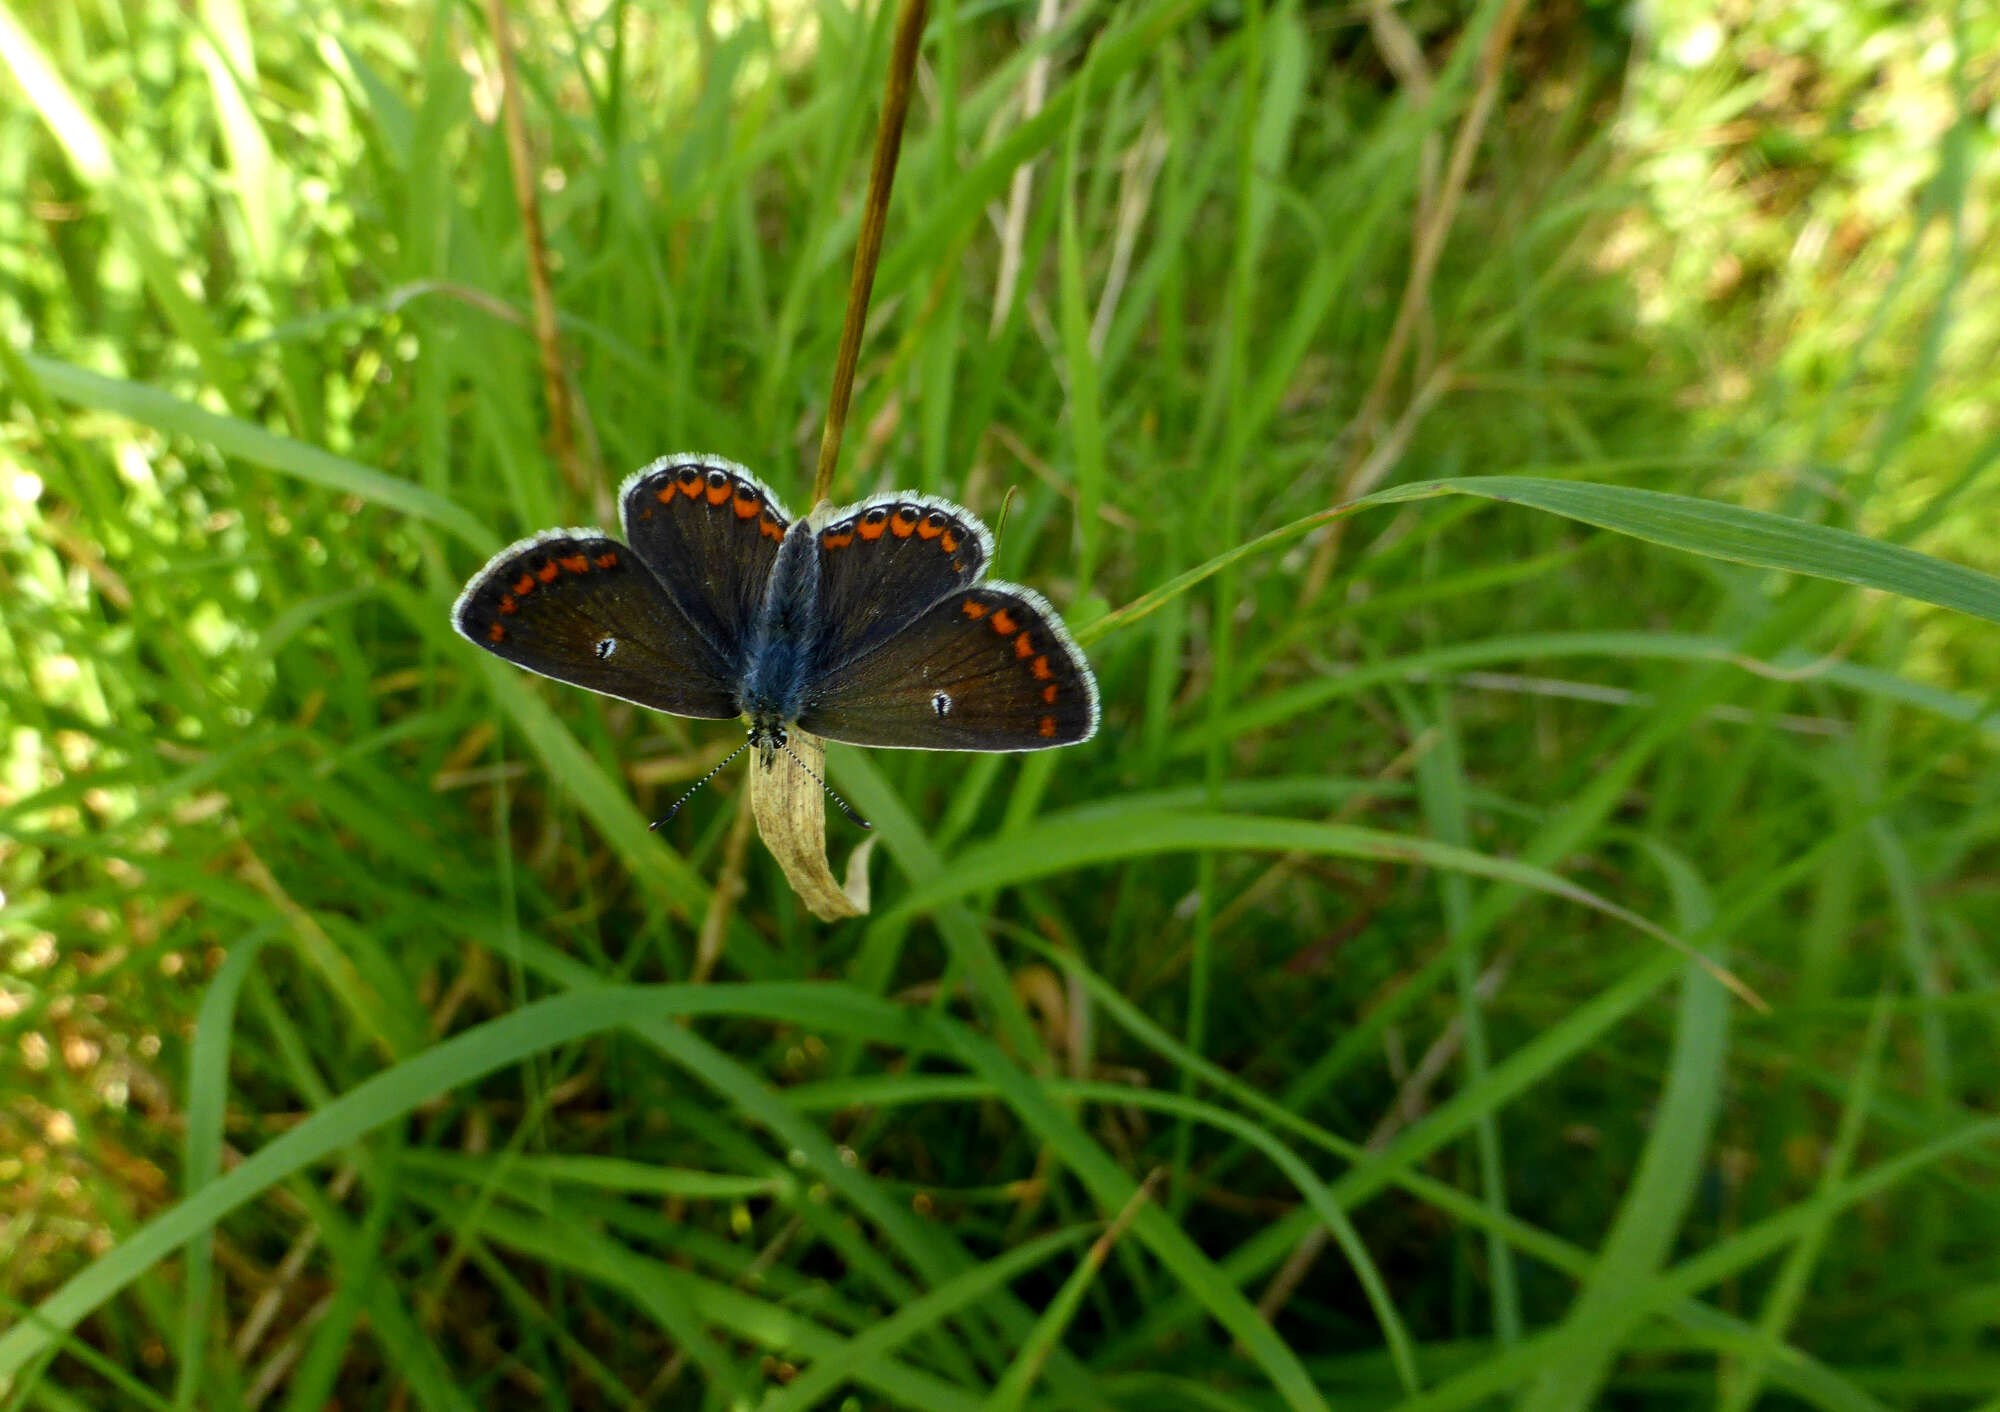 I honestly thought it would be a complete restart for the Brown Argus, yet it was in better numbers than ever!  Mother Nature's recovery process at its best!